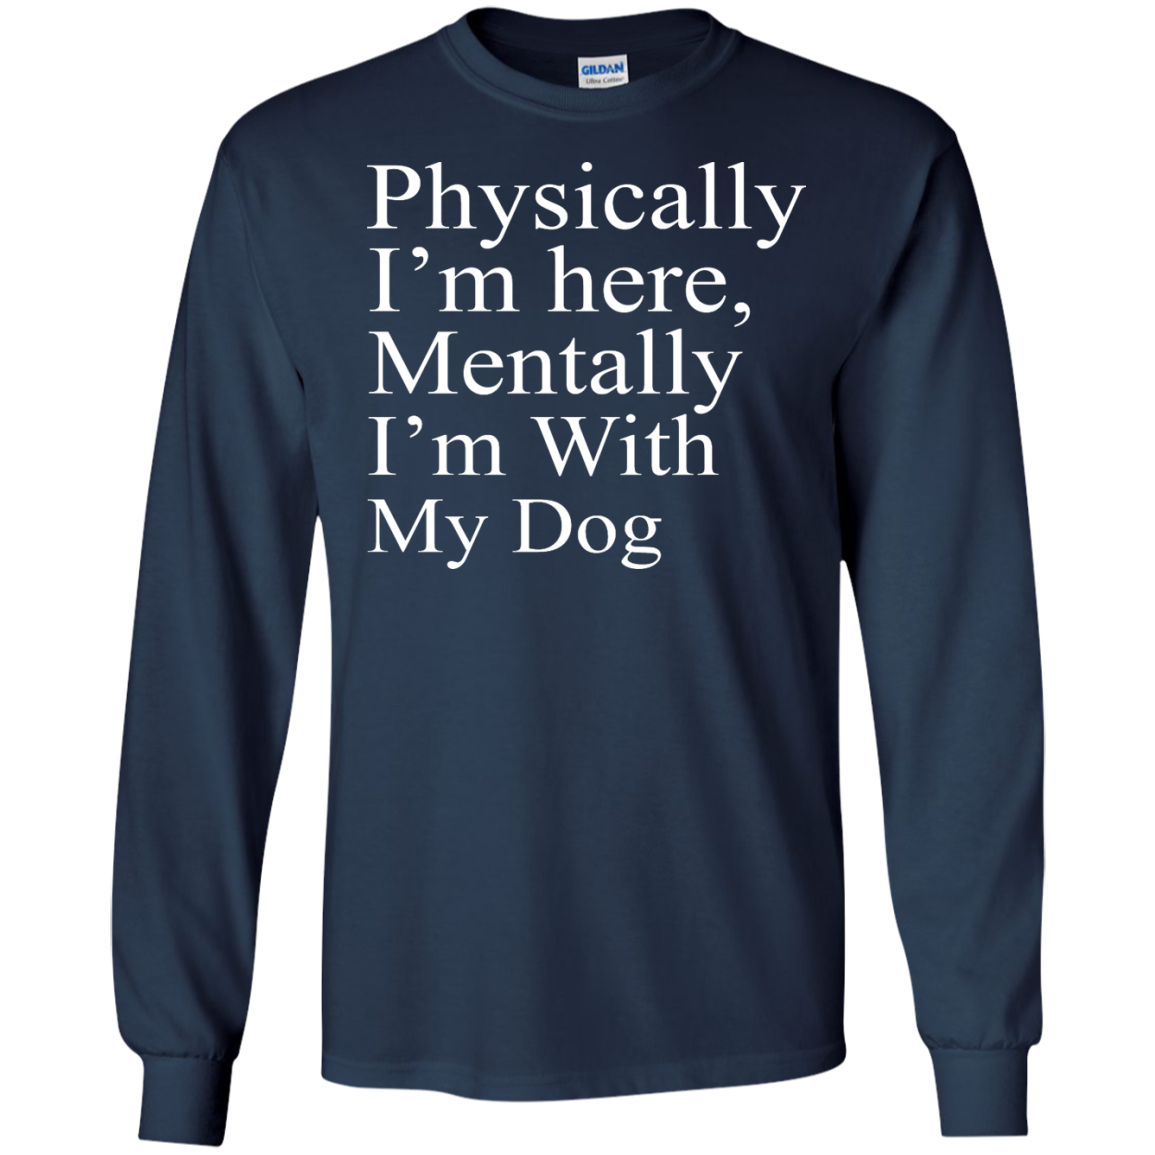 Physically I'm Here Mentally With My Dog shirt, sweater, tank